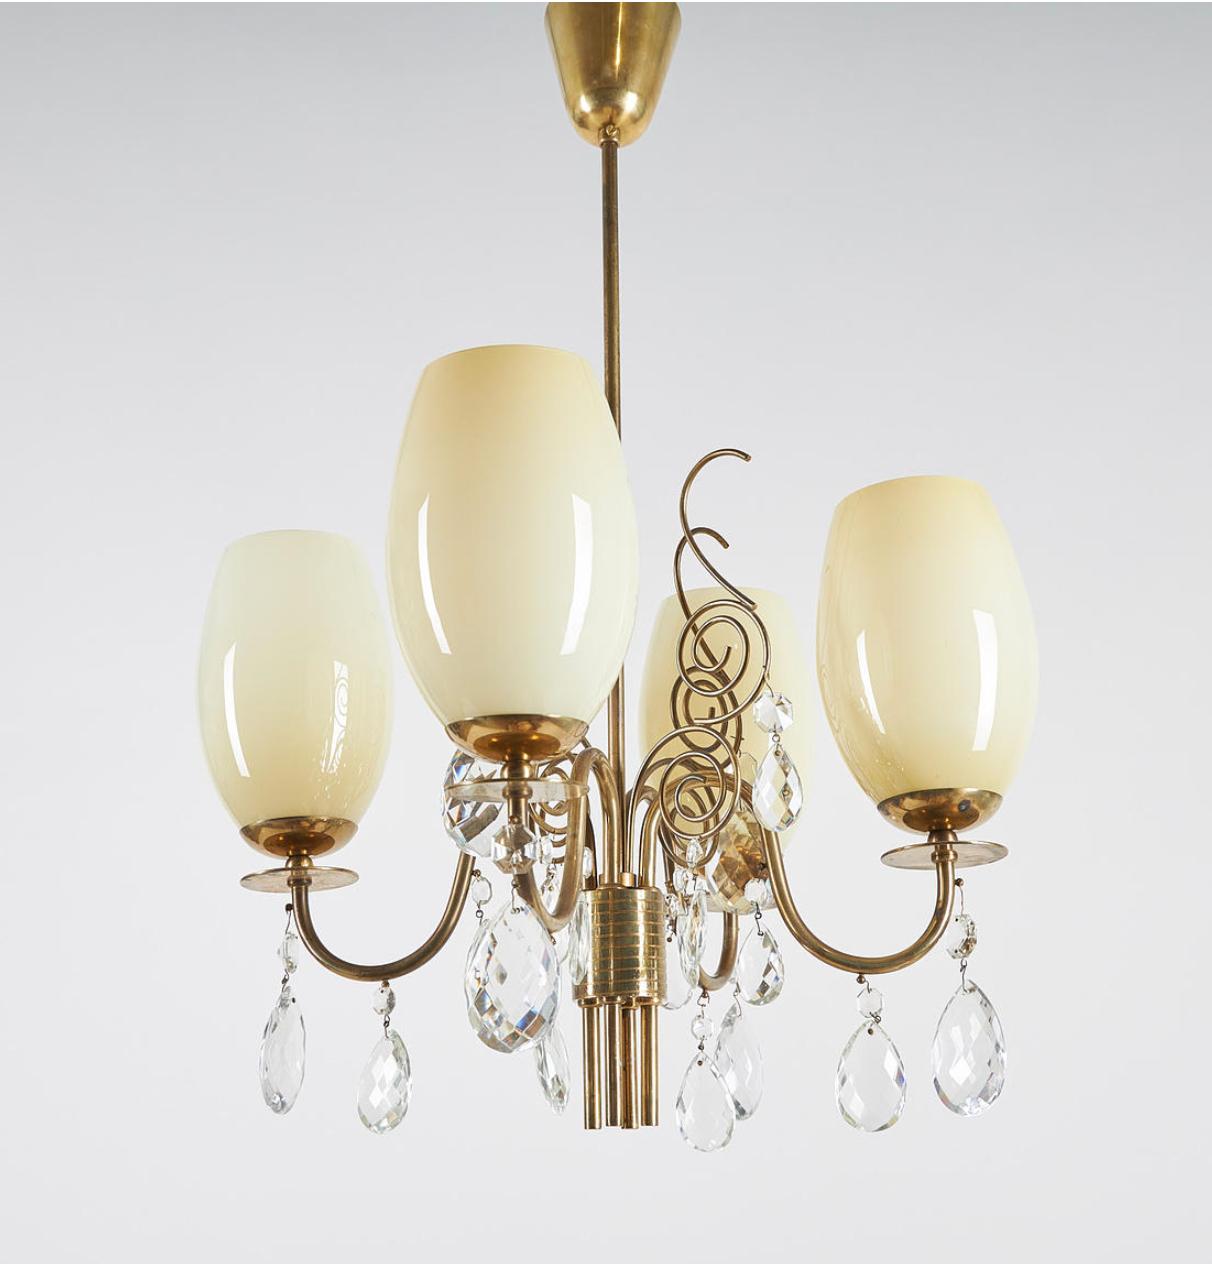 Vintage chandelier , design attributed by Paavo Tynell, produced by Idman Oy, Finland , circa 1950th. 
Brass , crystals, opaline glass shades. Stamped 